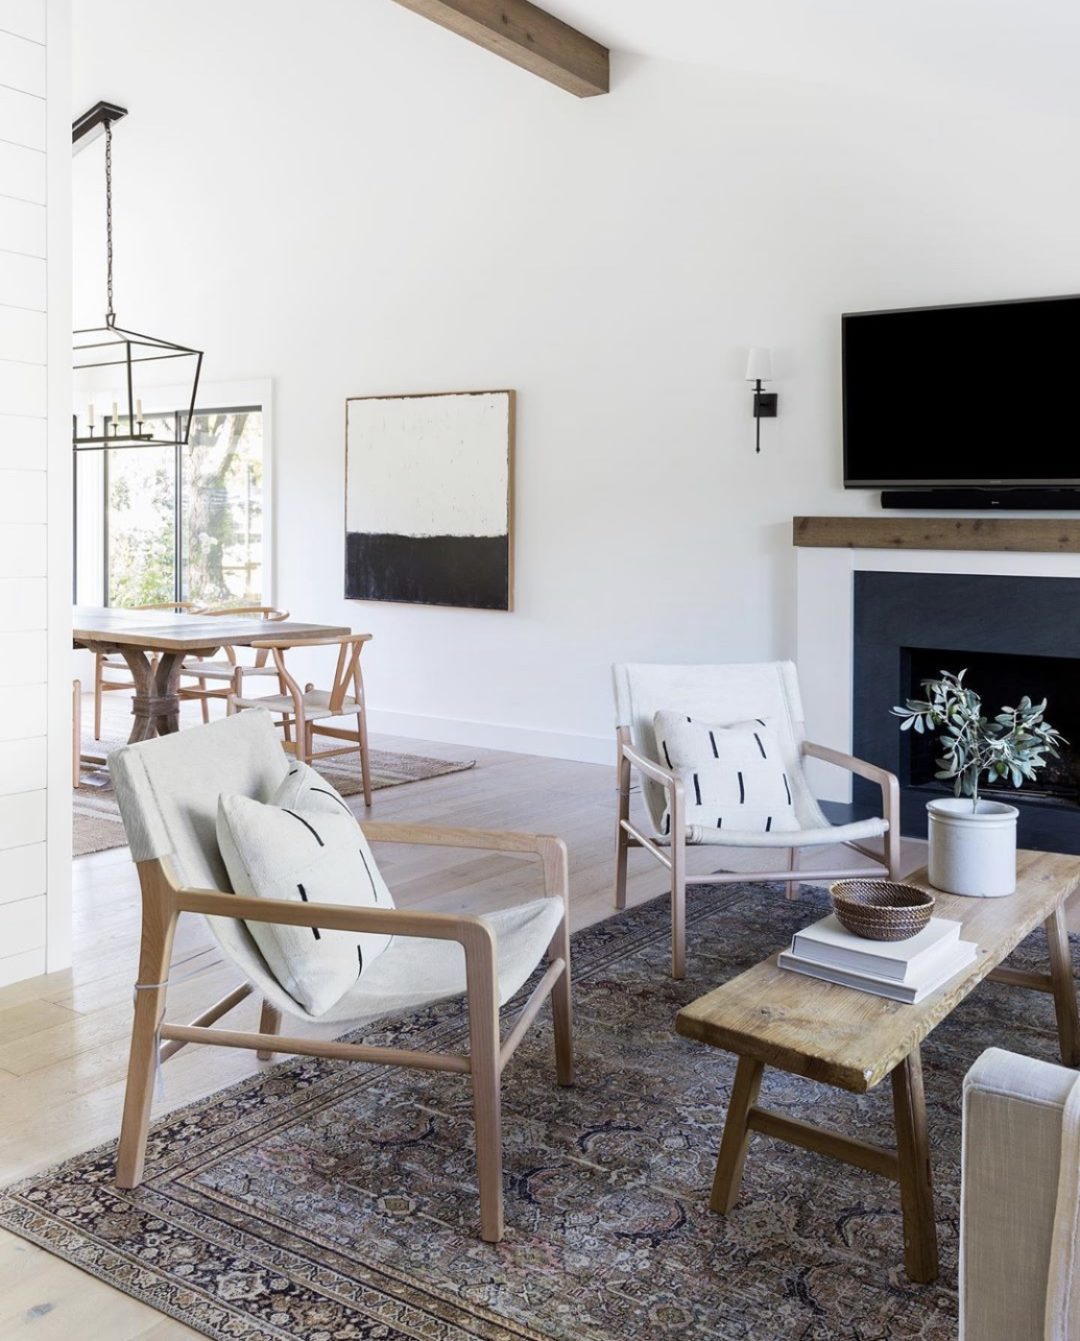 The Aesthetic I Want in Our Denver Home • BrightonTheDay